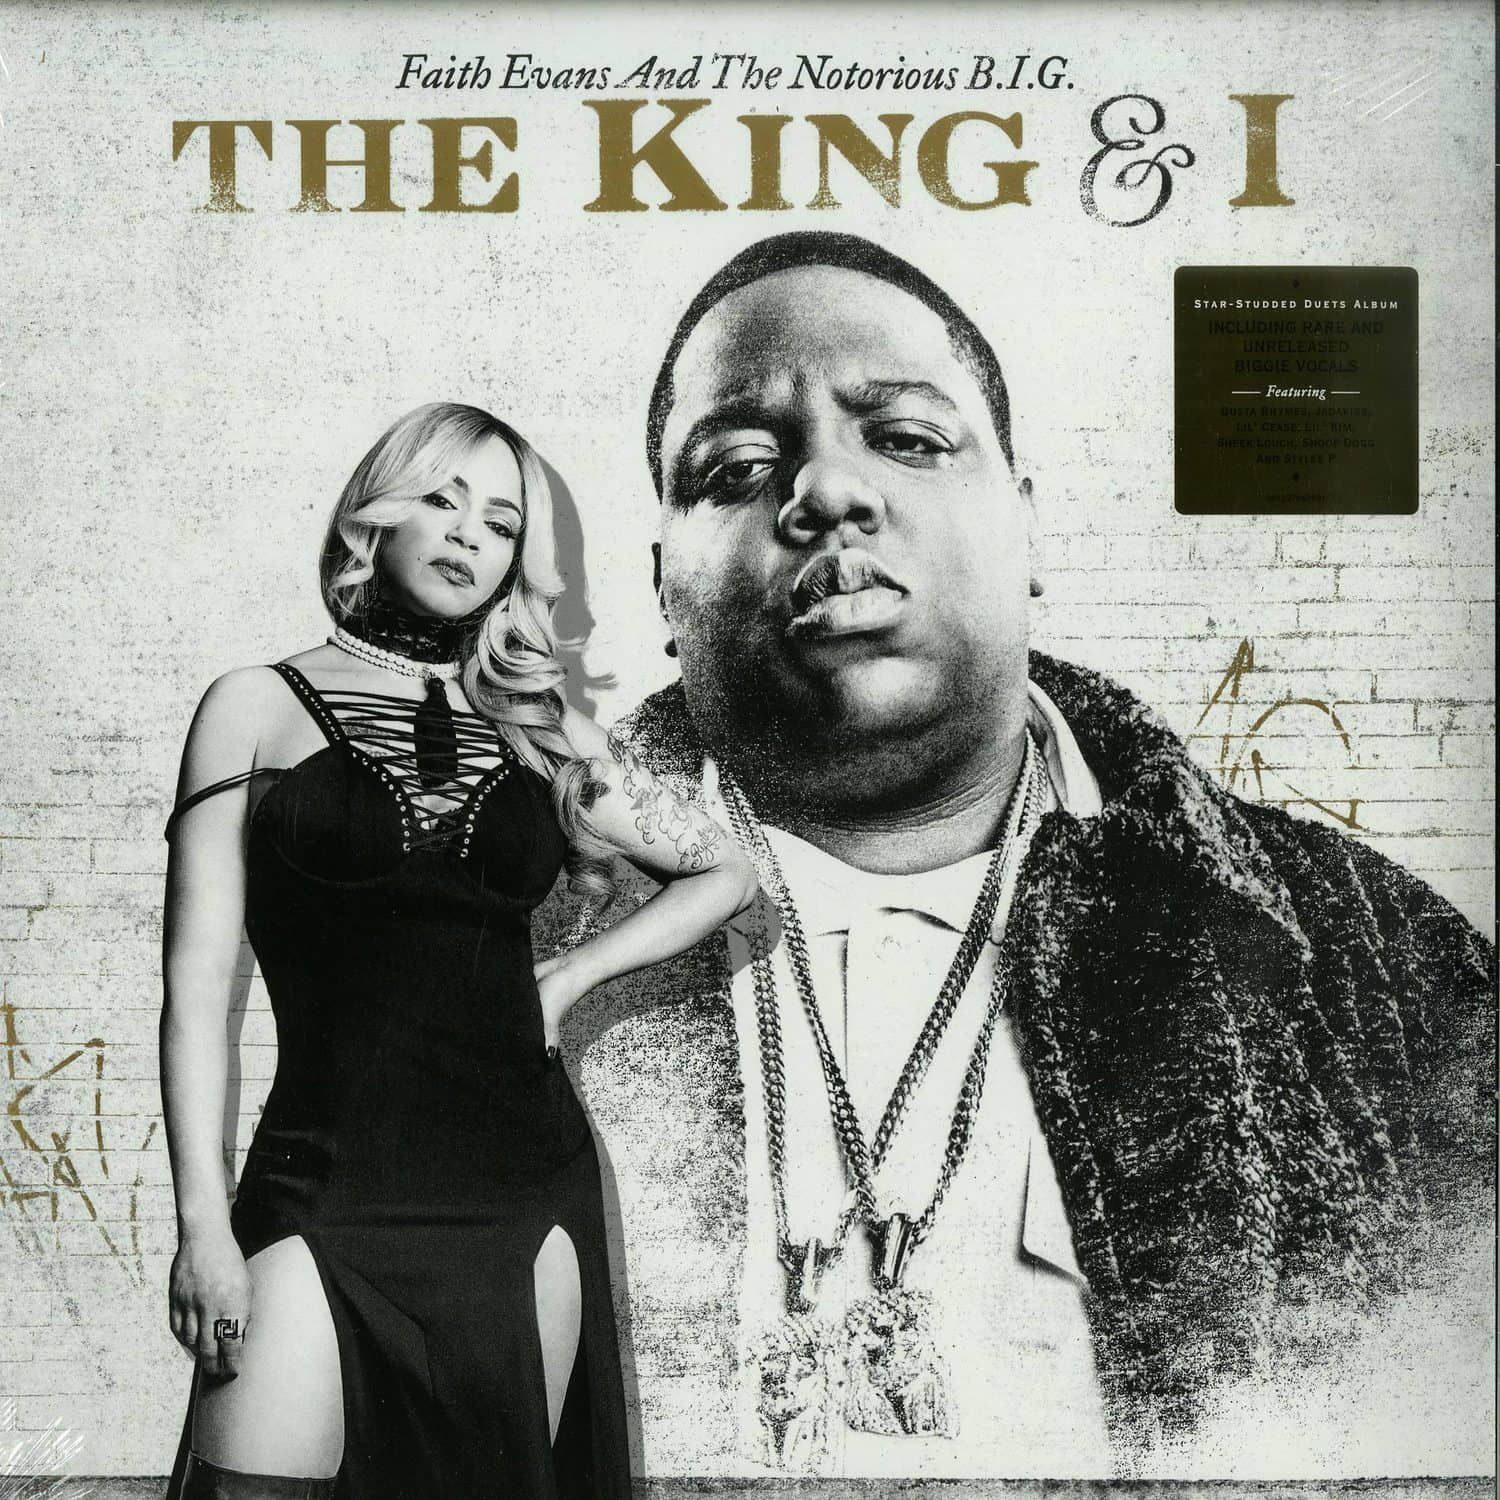 Faith Evans And The Notorious B.I.G. - THE KING & I 